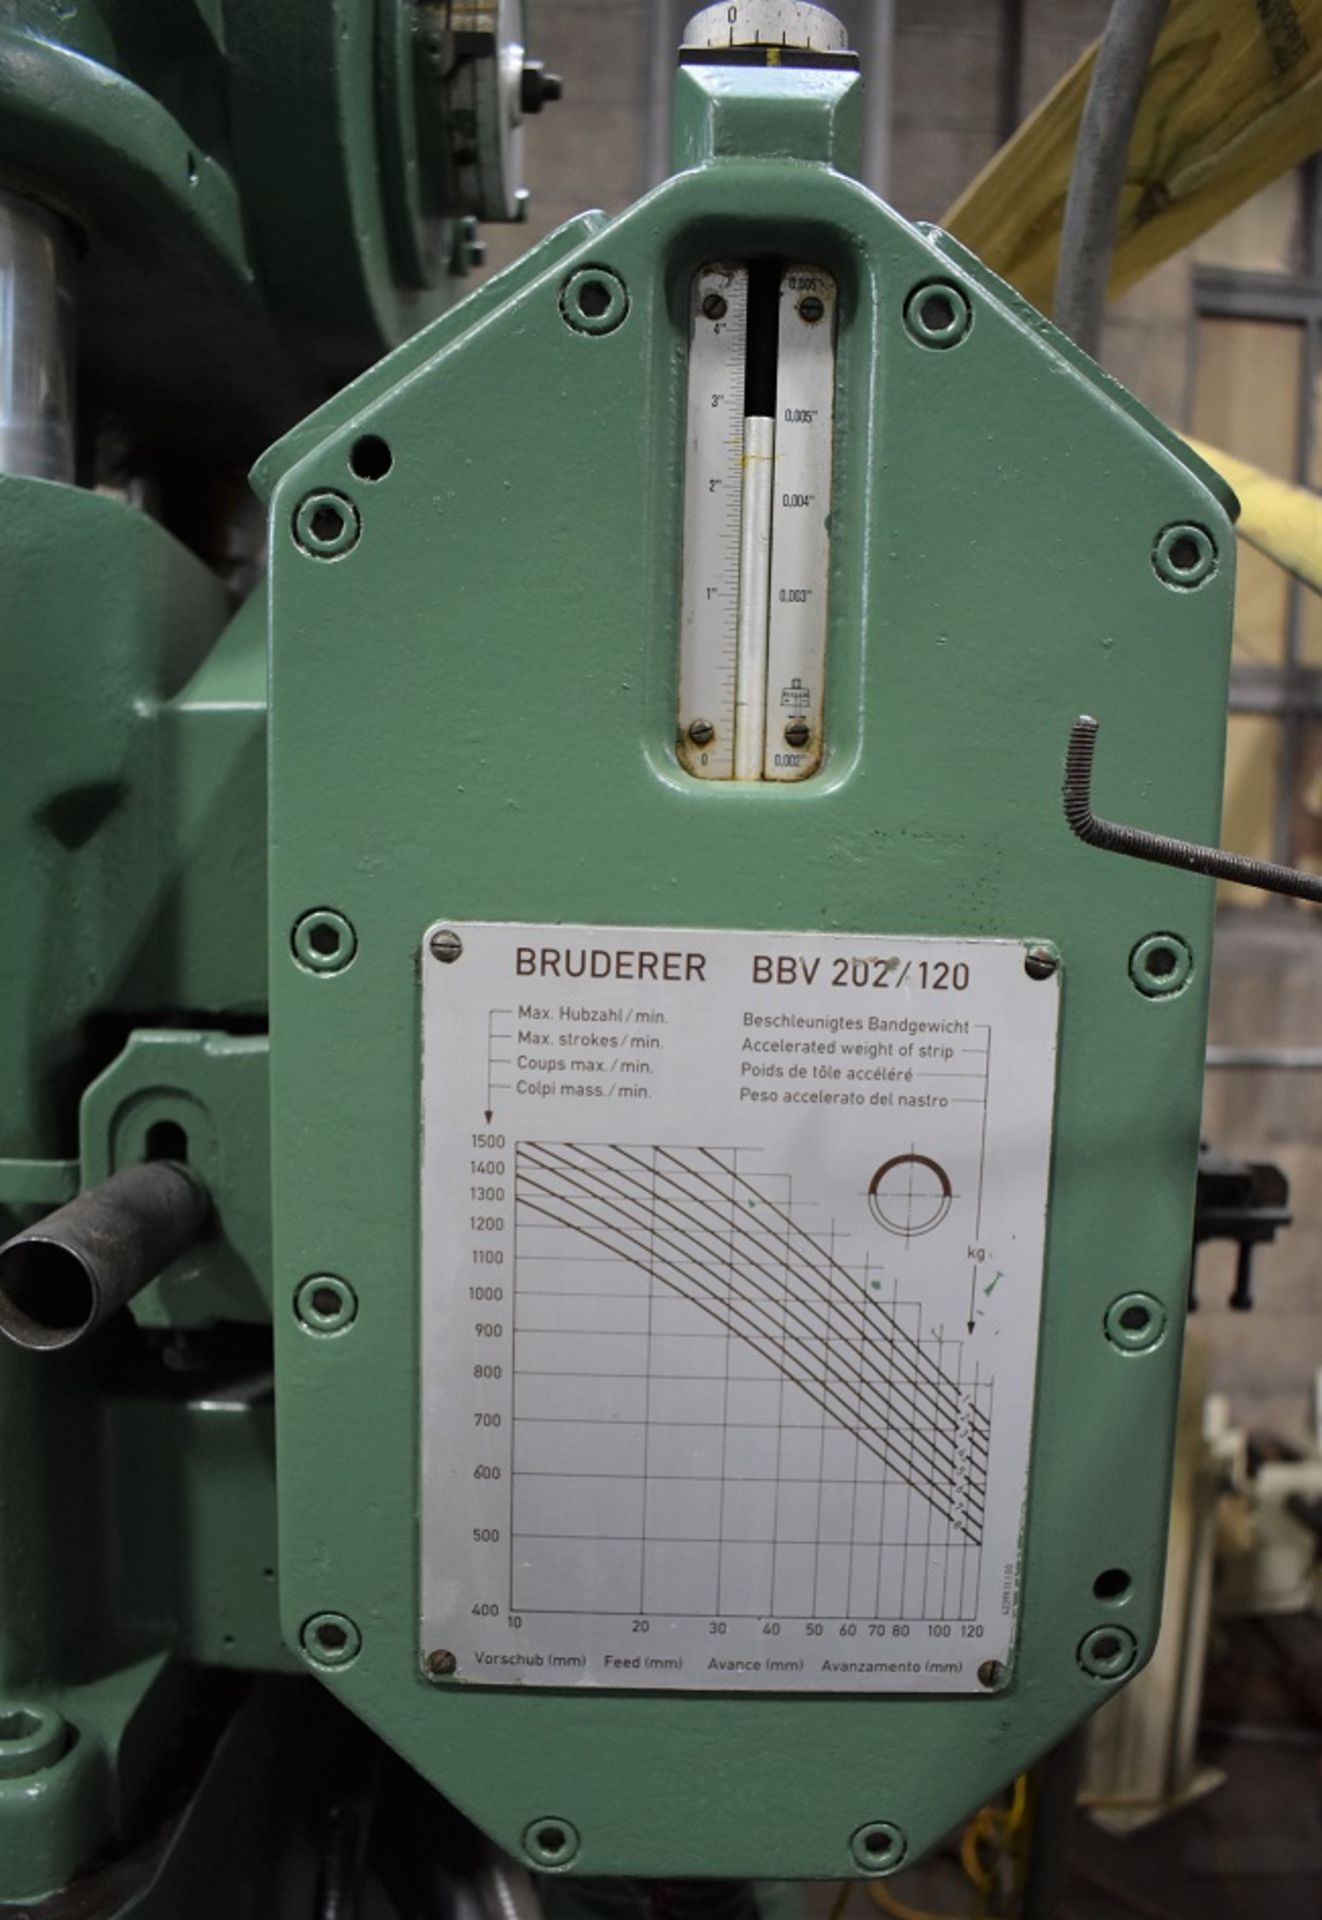 BRUDERER 60 TON MODEL BSTA 60H HIGH SPEED 4 POST PUNCH PRESS, YEAR 1976, SN 4179 - Image 7 of 8